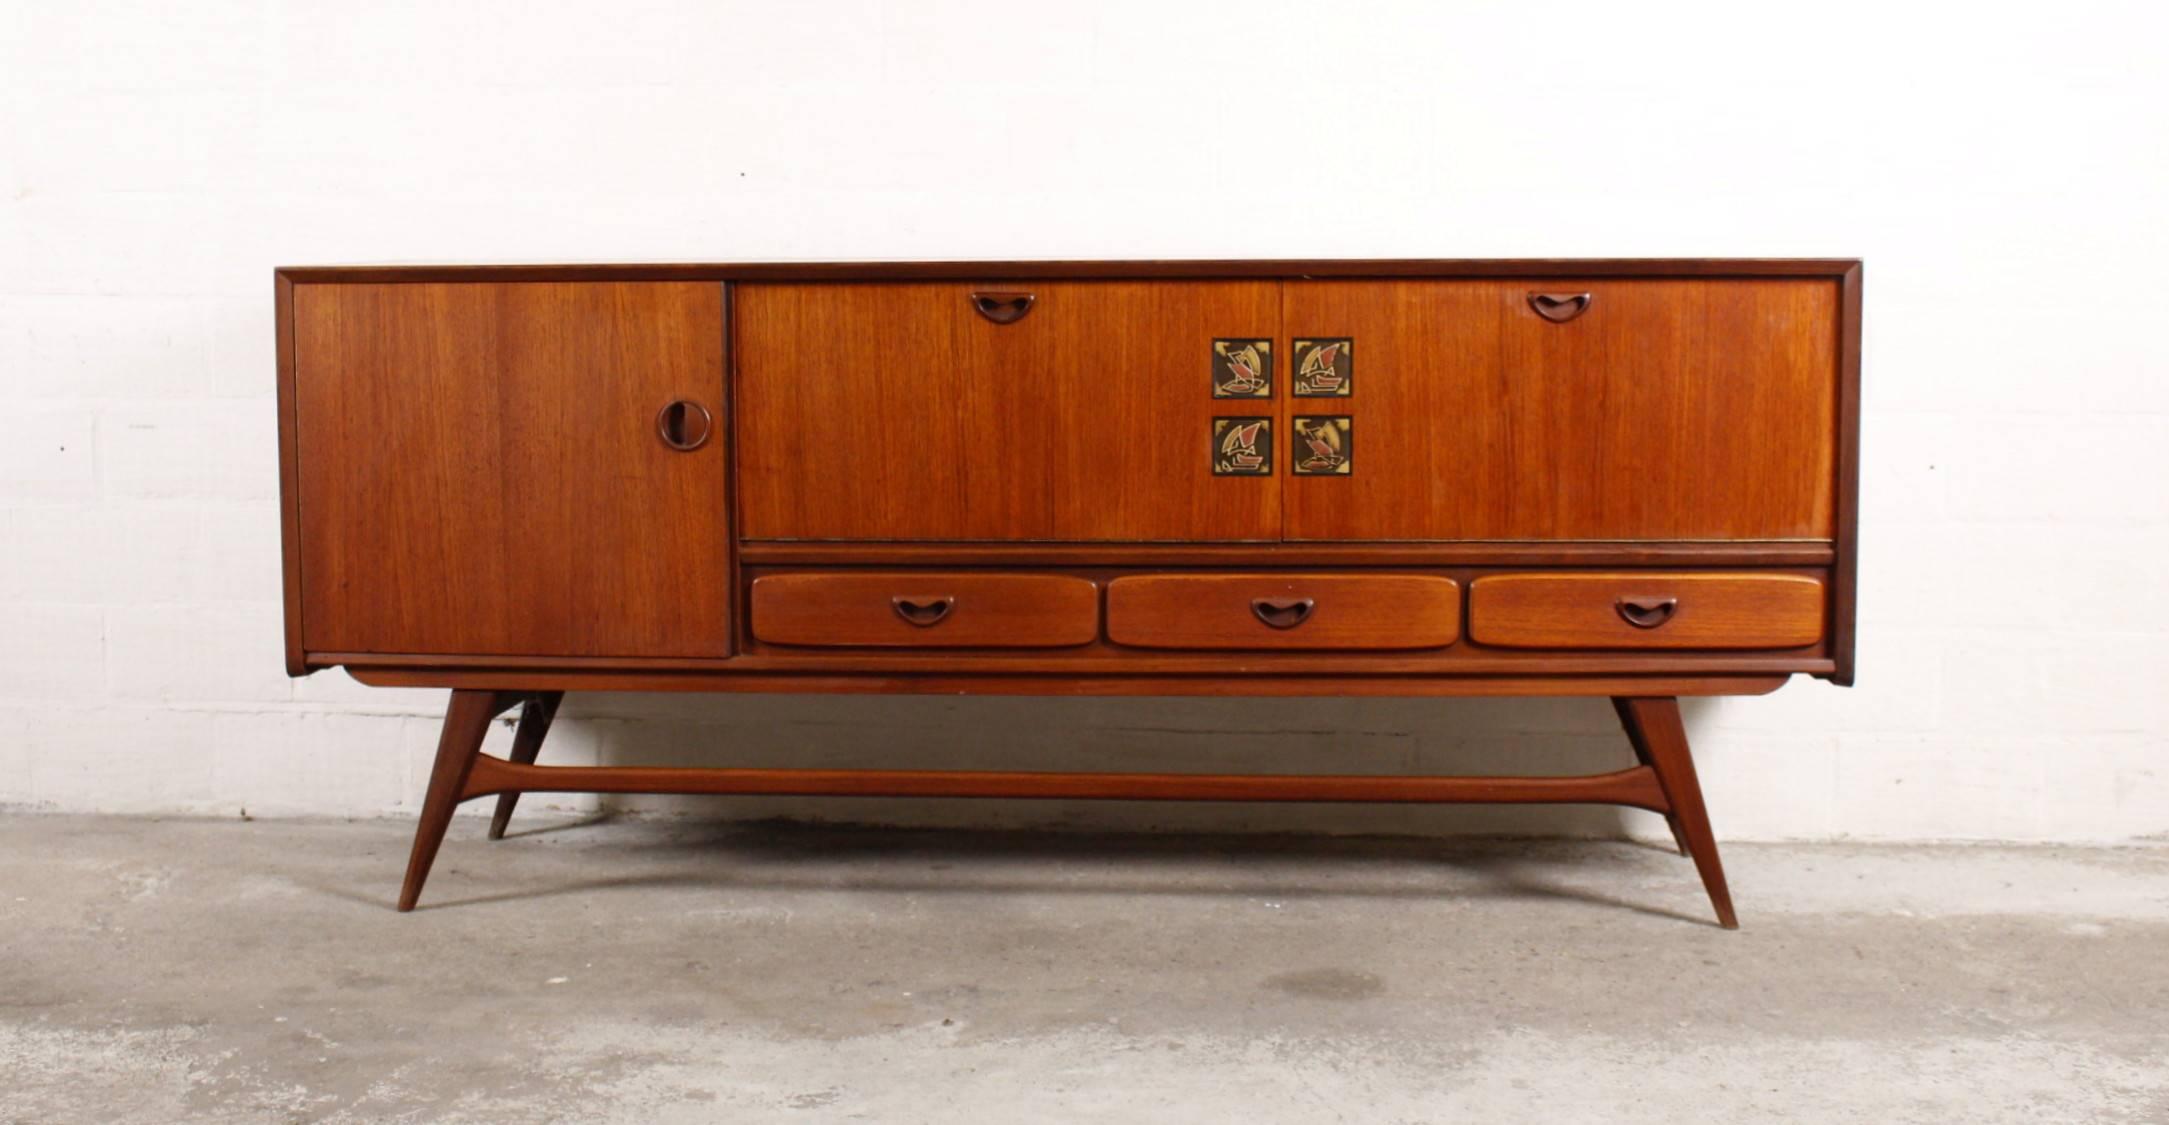 Sideboard of designer Louis Van Teeffelen for Wébé.
The sideboard is full teak wood.
With a nice accent by four ceramic tiles in the middle of the cabinet.
The cabinet is in very good condition.